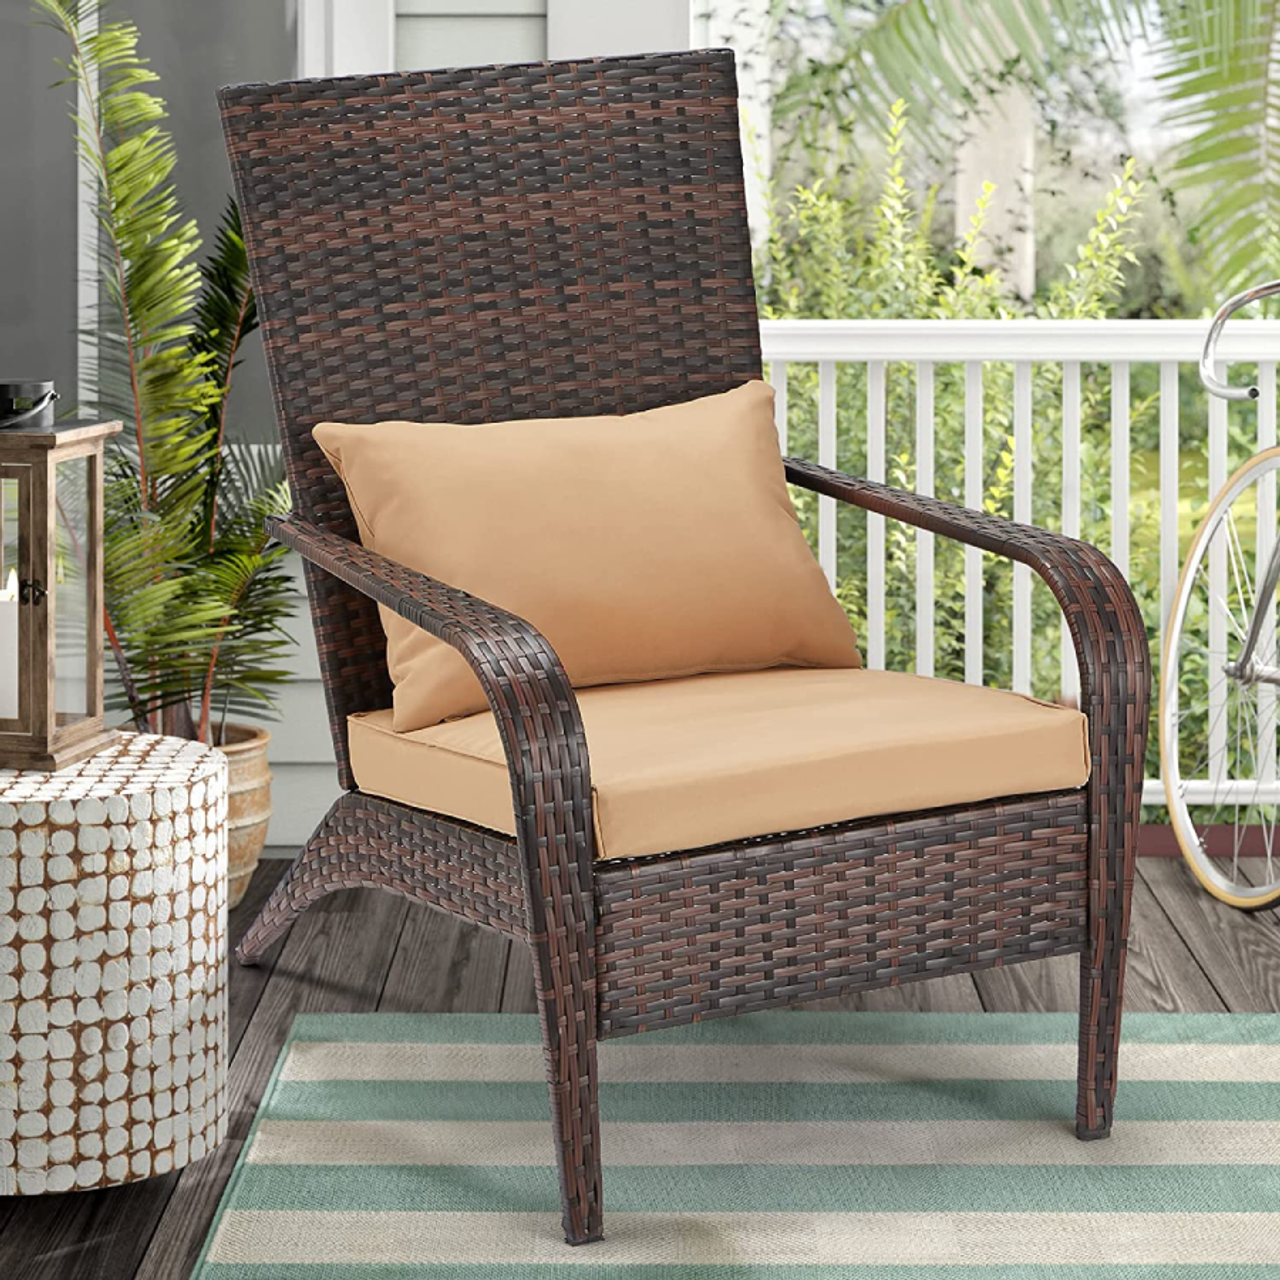 Outdoor Rattan Adirondack Chair (1- or 2-Pack) product image